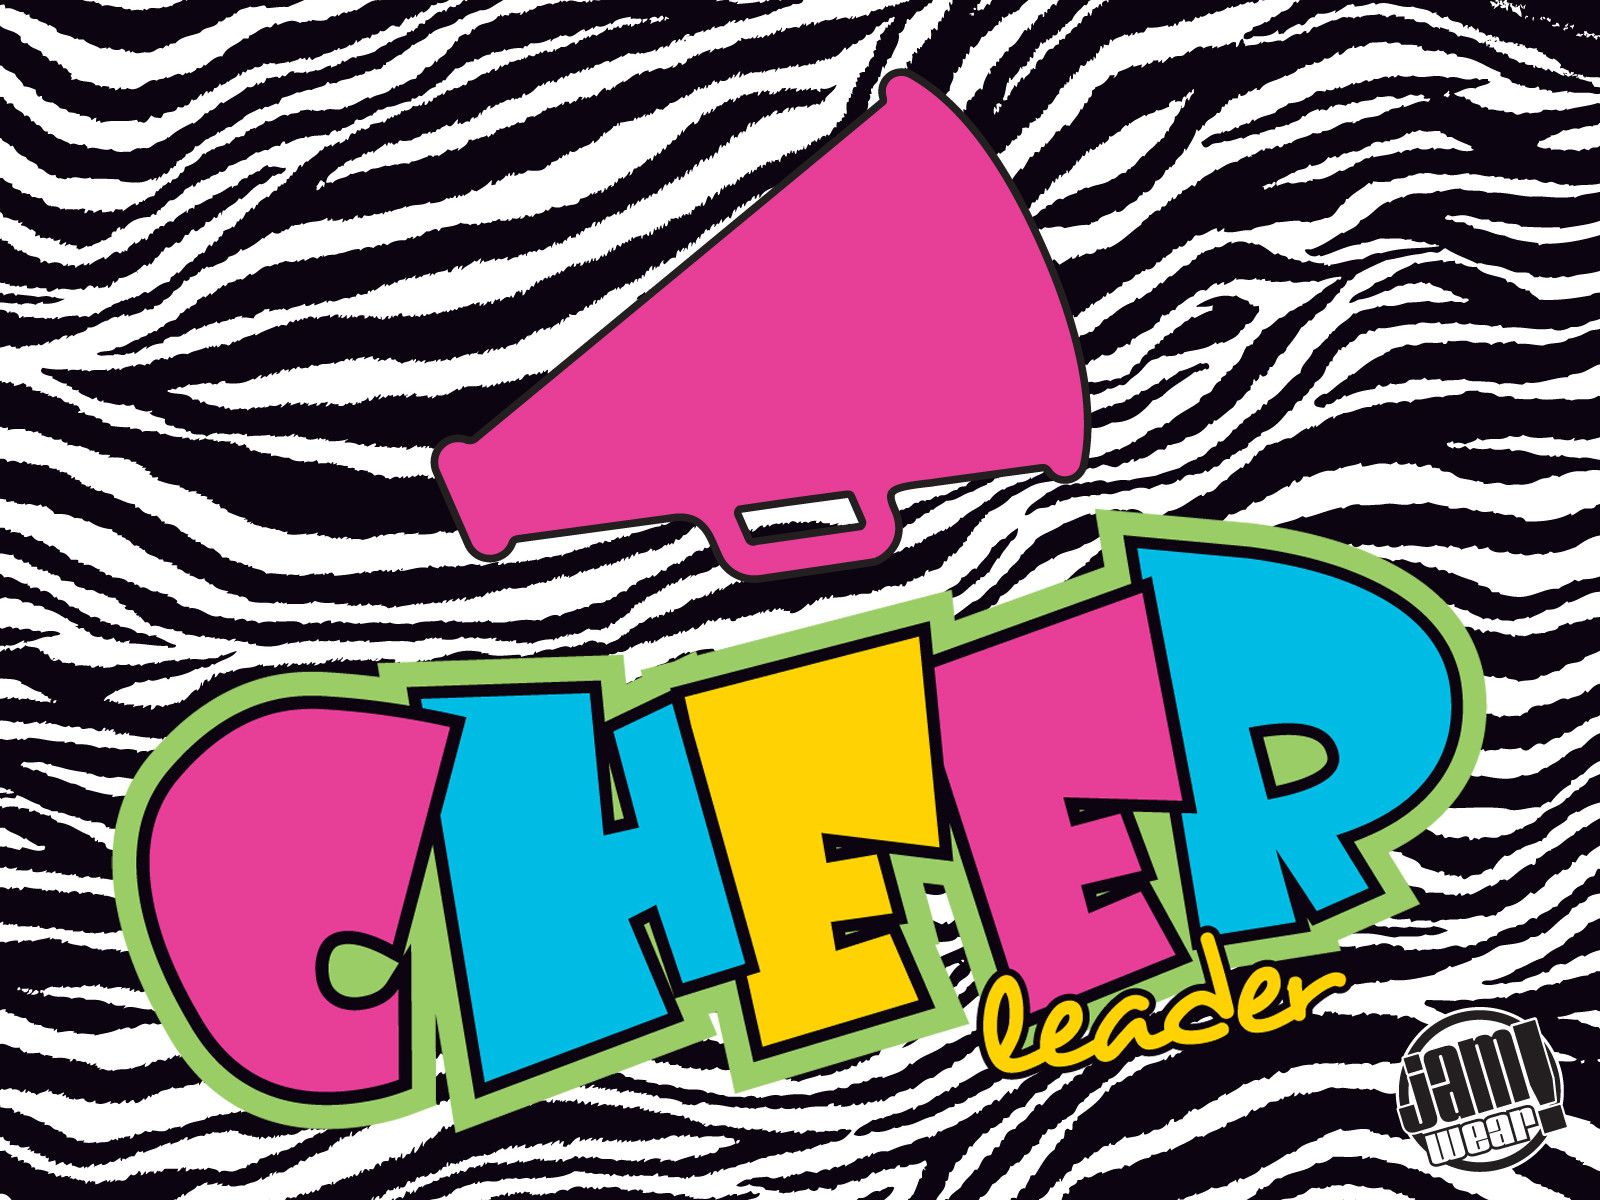 Cheer Wallpaper High Definition For